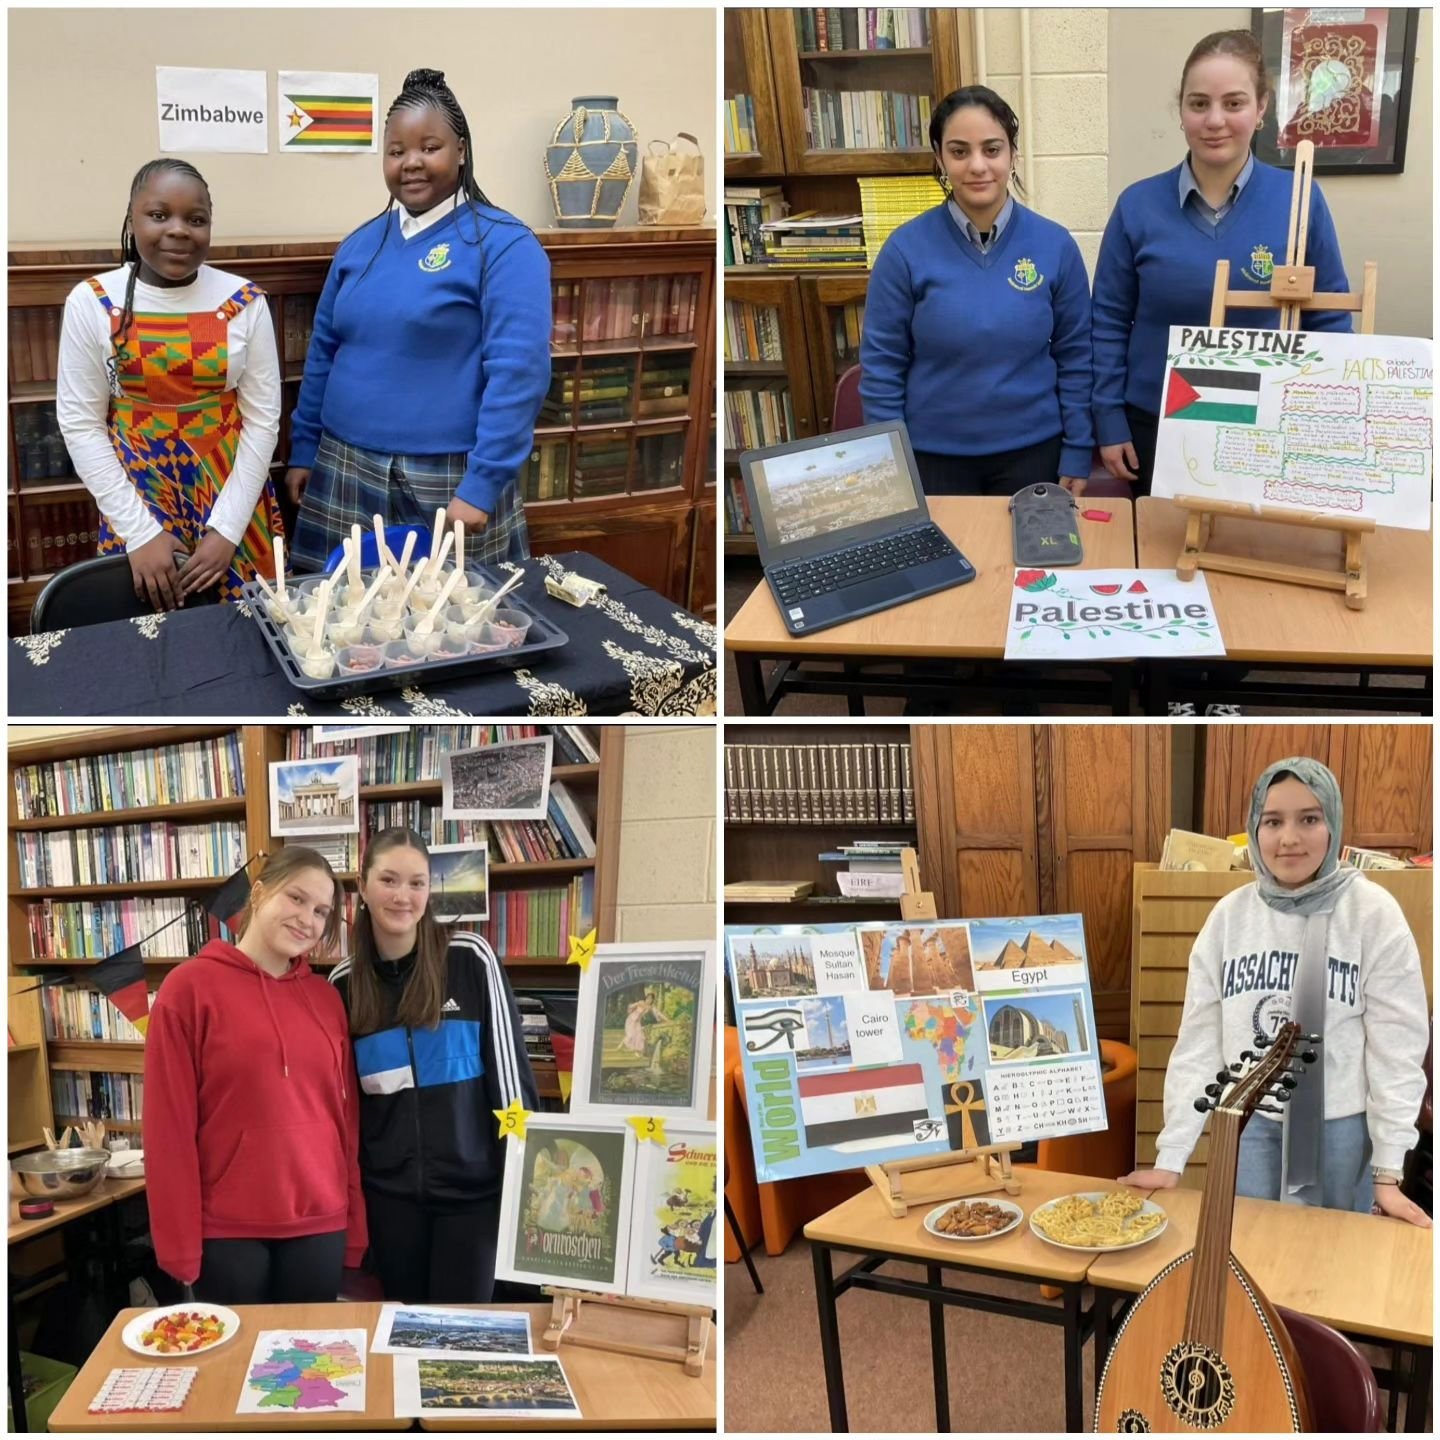 Congratulations to TYB who organised a very successful Culture Day last Friday in St. Joseph&rsquo;s.
 &nbsp;
Thank you to our wonderful students who hosted stands, cooked traditional foods and dressed in traditional dress. 
It was a wonderful&nbsp;o